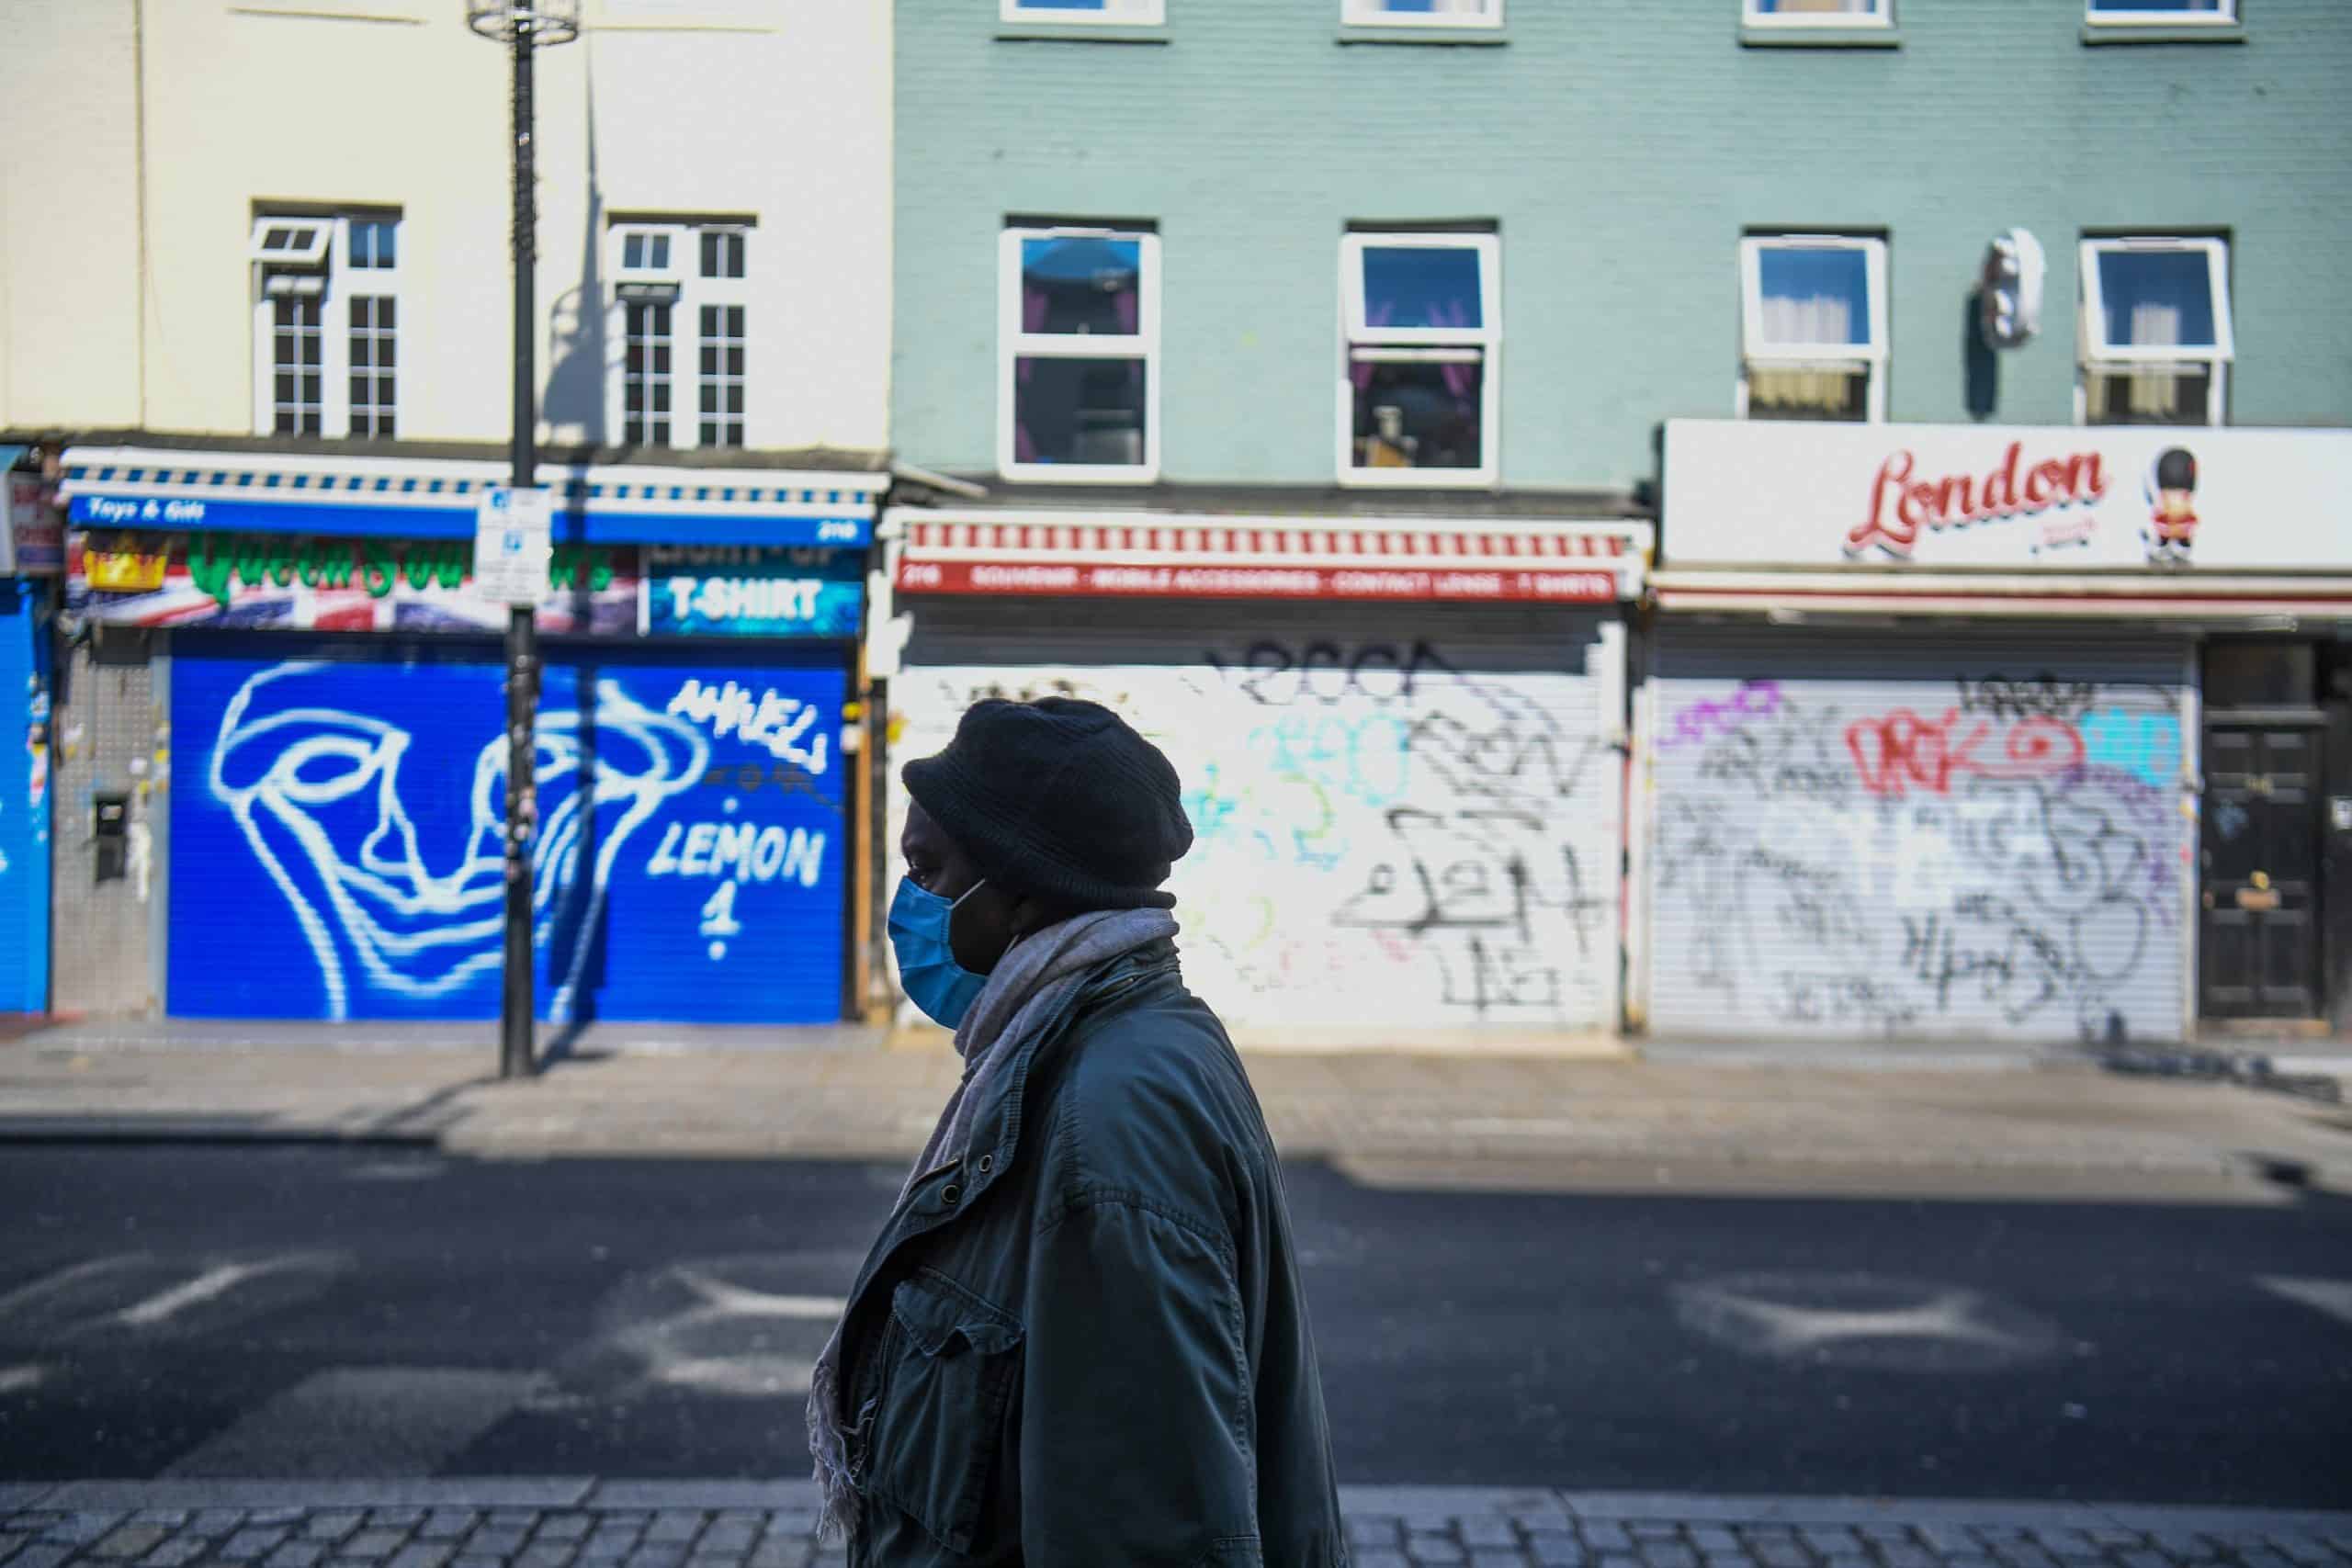 Covid-19 crisis has plunged nearly 700,000 Brits into poverty, study finds